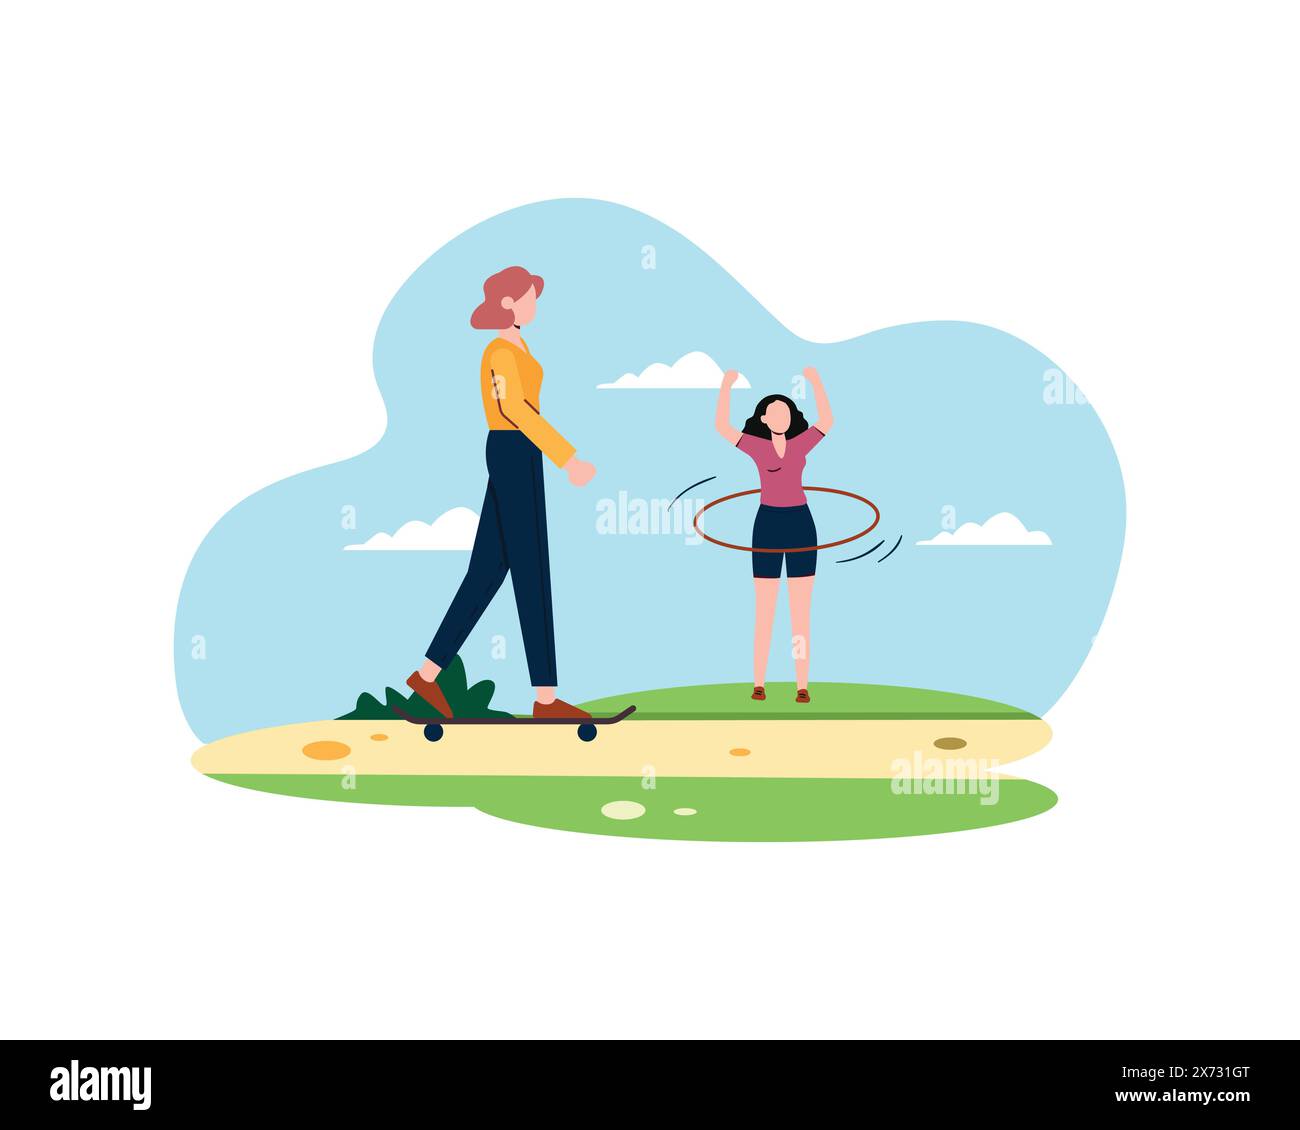 Two young women are exercising, one playing hula hoops, the other playing skate boards. sport and recreation concept. Healthy lifestyle illustration i Stock Vector